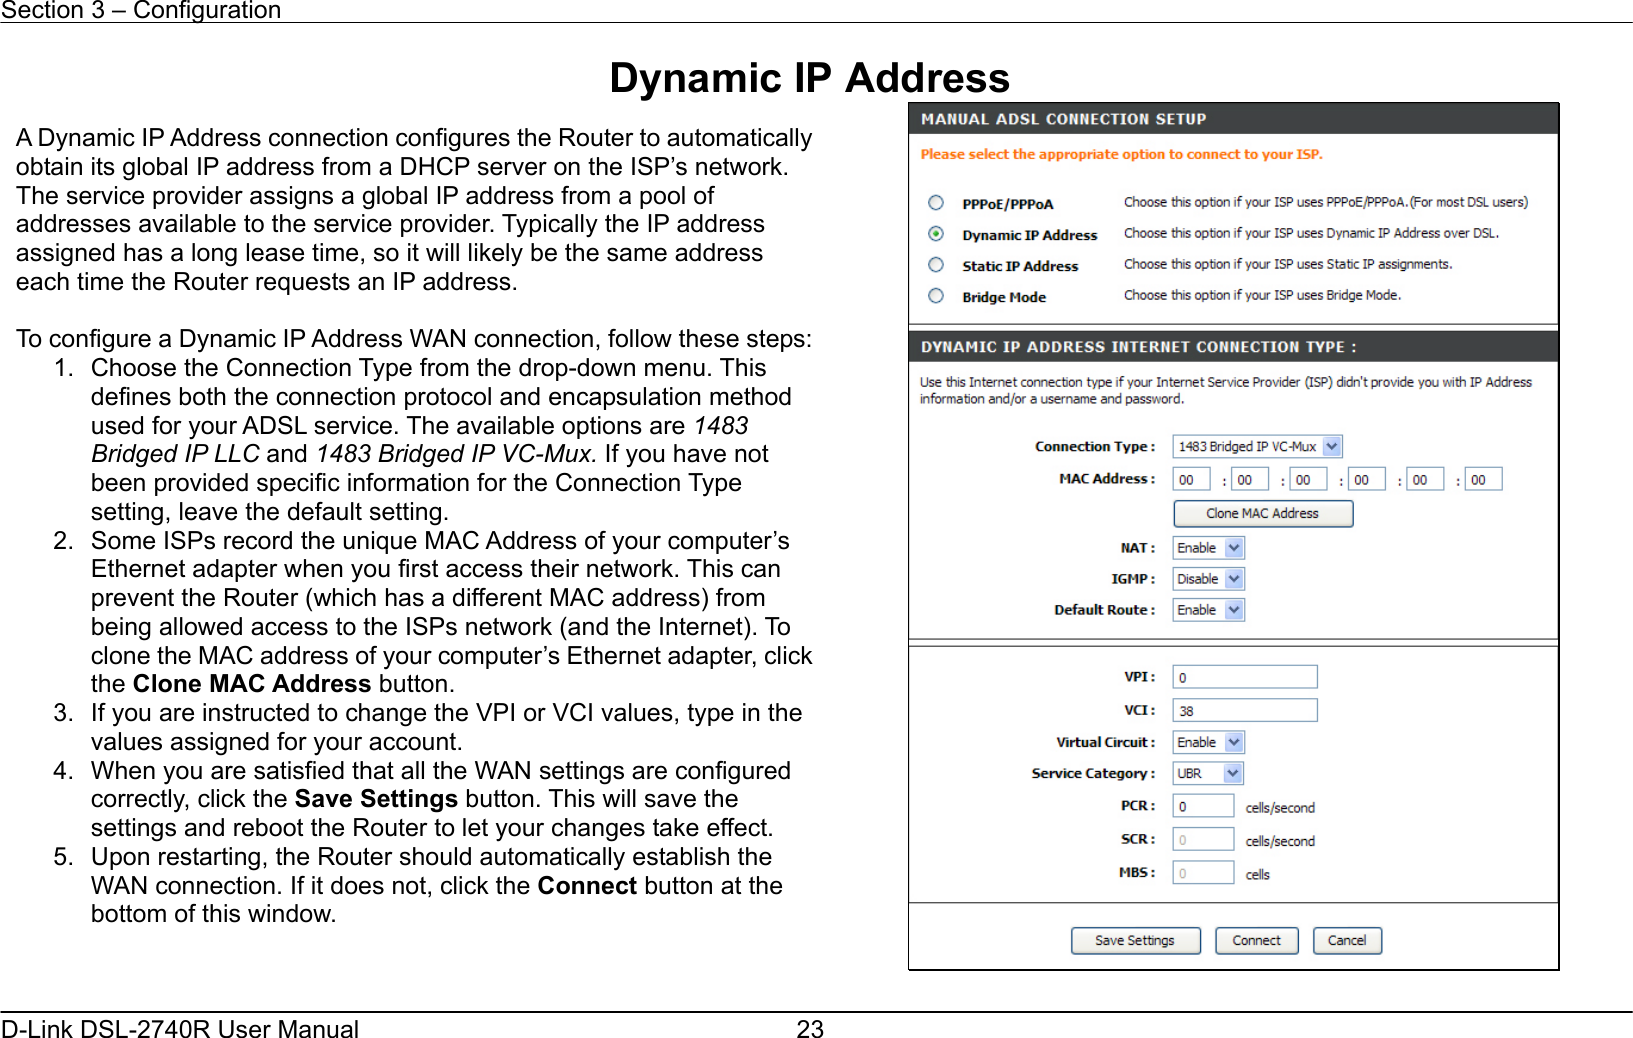 Section 3 – Configuration   D-Link DSL-2740R User Manual  23Dynamic IP Address   A Dynamic IP Address connection configures the Router to automaticallyobtain its global IP address from a DHCP server on the ISP’s network. The service provider assigns a global IP address from a pool of addresses available to the service provider. Typically the IP address assigned has a long lease time, so it will likely be the same address each time the Router requests an IP address.  To configure a Dynamic IP Address WAN connection, follow these steps:1.  Choose the Connection Type from the drop-down menu. This defines both the connection protocol and encapsulation method used for your ADSL service. The available options are 1483 Bridged IP LLC and 1483 Bridged IP VC-Mux. If you have not been provided specific information for the Connection Type setting, leave the default setting. 2.  Some ISPs record the unique MAC Address of your computer’s Ethernet adapter when you first access their network. This can prevent the Router (which has a different MAC address) from being allowed access to the ISPs network (and the Internet). To clone the MAC address of your computer’s Ethernet adapter, clickthe Clone MAC Address button. 3.  If you are instructed to change the VPI or VCI values, type in the values assigned for your account. 4.  When you are satisfied that all the WAN settings are configured correctly, click the Save Settings button. This will save the settings and reboot the Router to let your changes take effect.   5.  Upon restarting, the Router should automatically establish the WAN connection. If it does not, click the Connect button at the bottom of this window.  